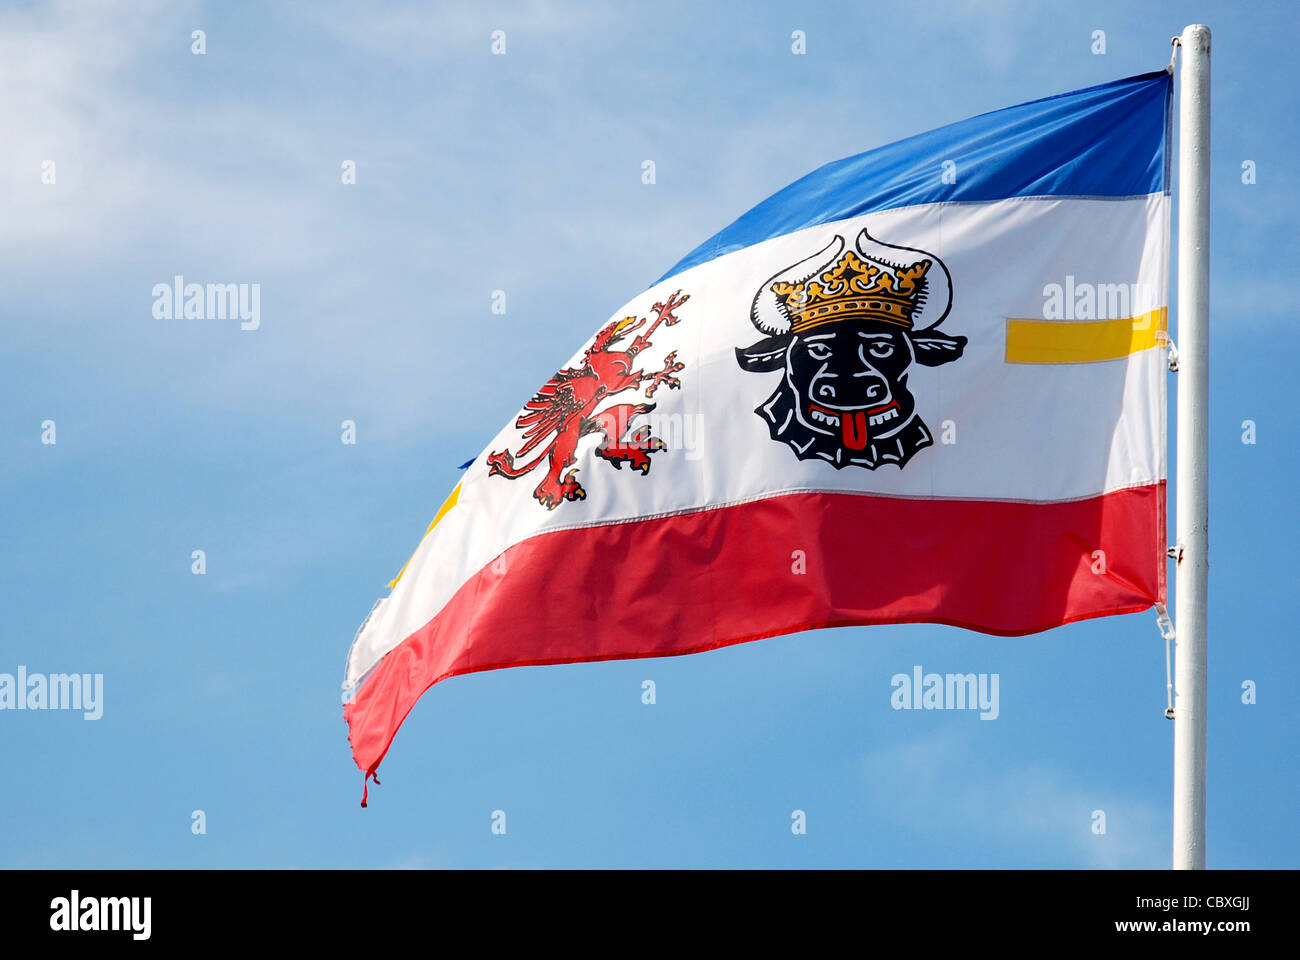 Fly flags with the coat of arms of the Federal state from Mecklenburg-Western Pomerania. Stock Photo